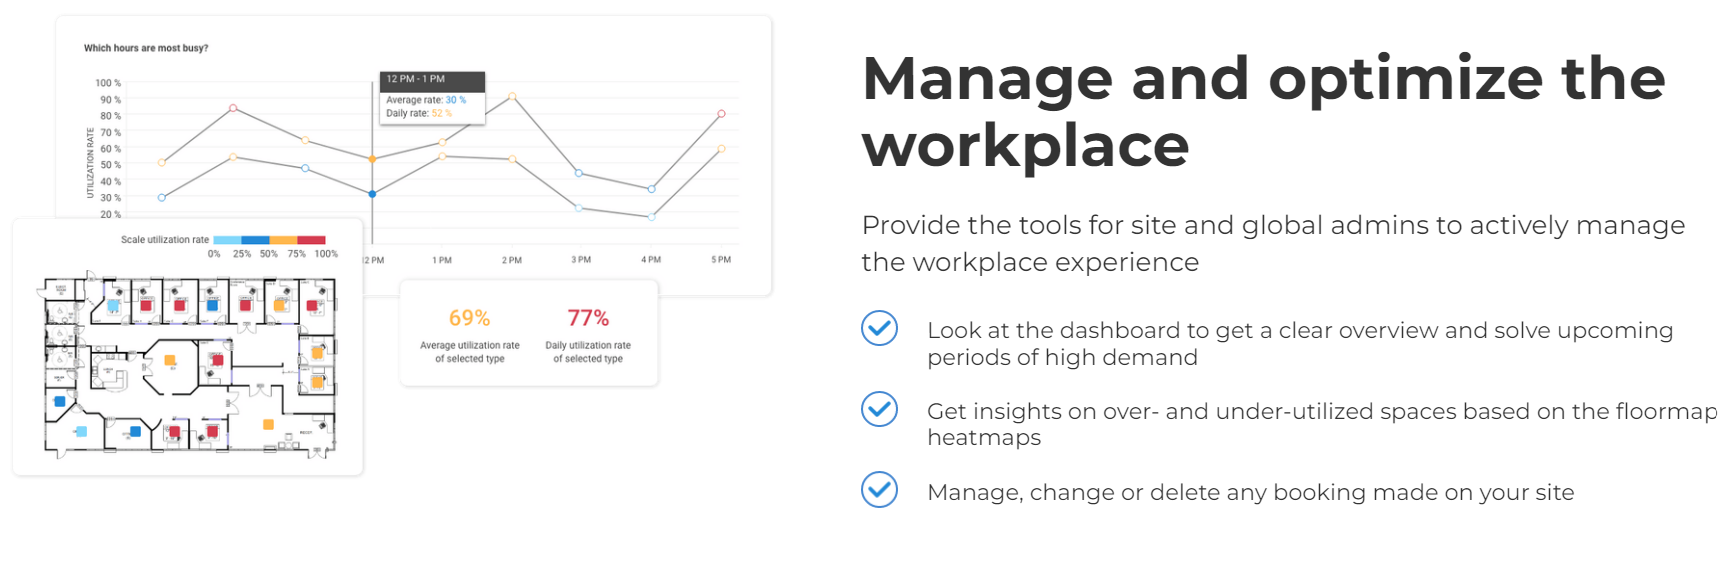 Tribeloo Software - Manage and optimize the workplace